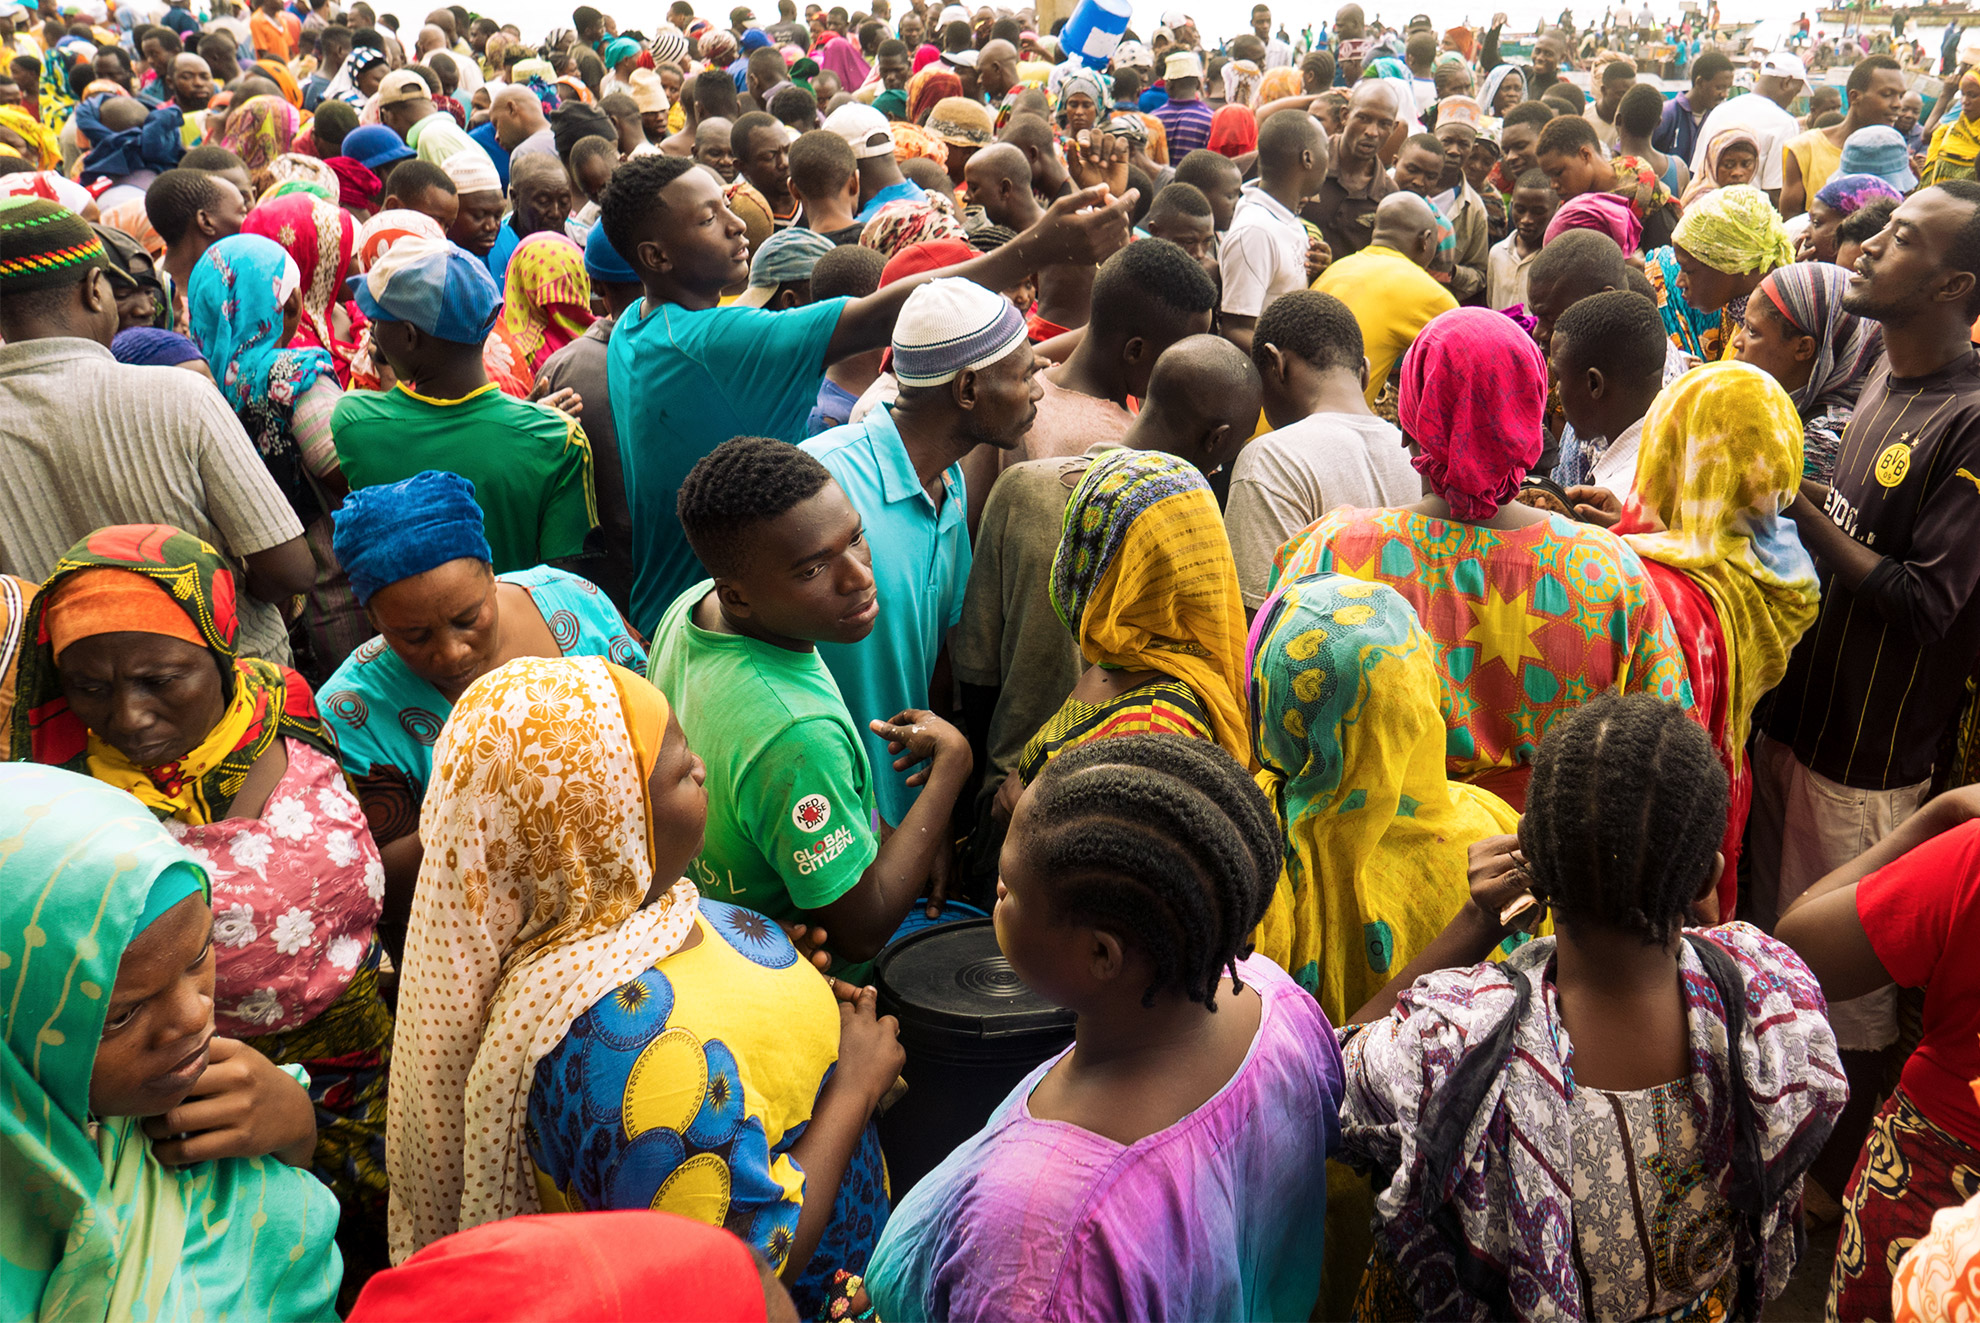 Close-up of many people crowded together at the market